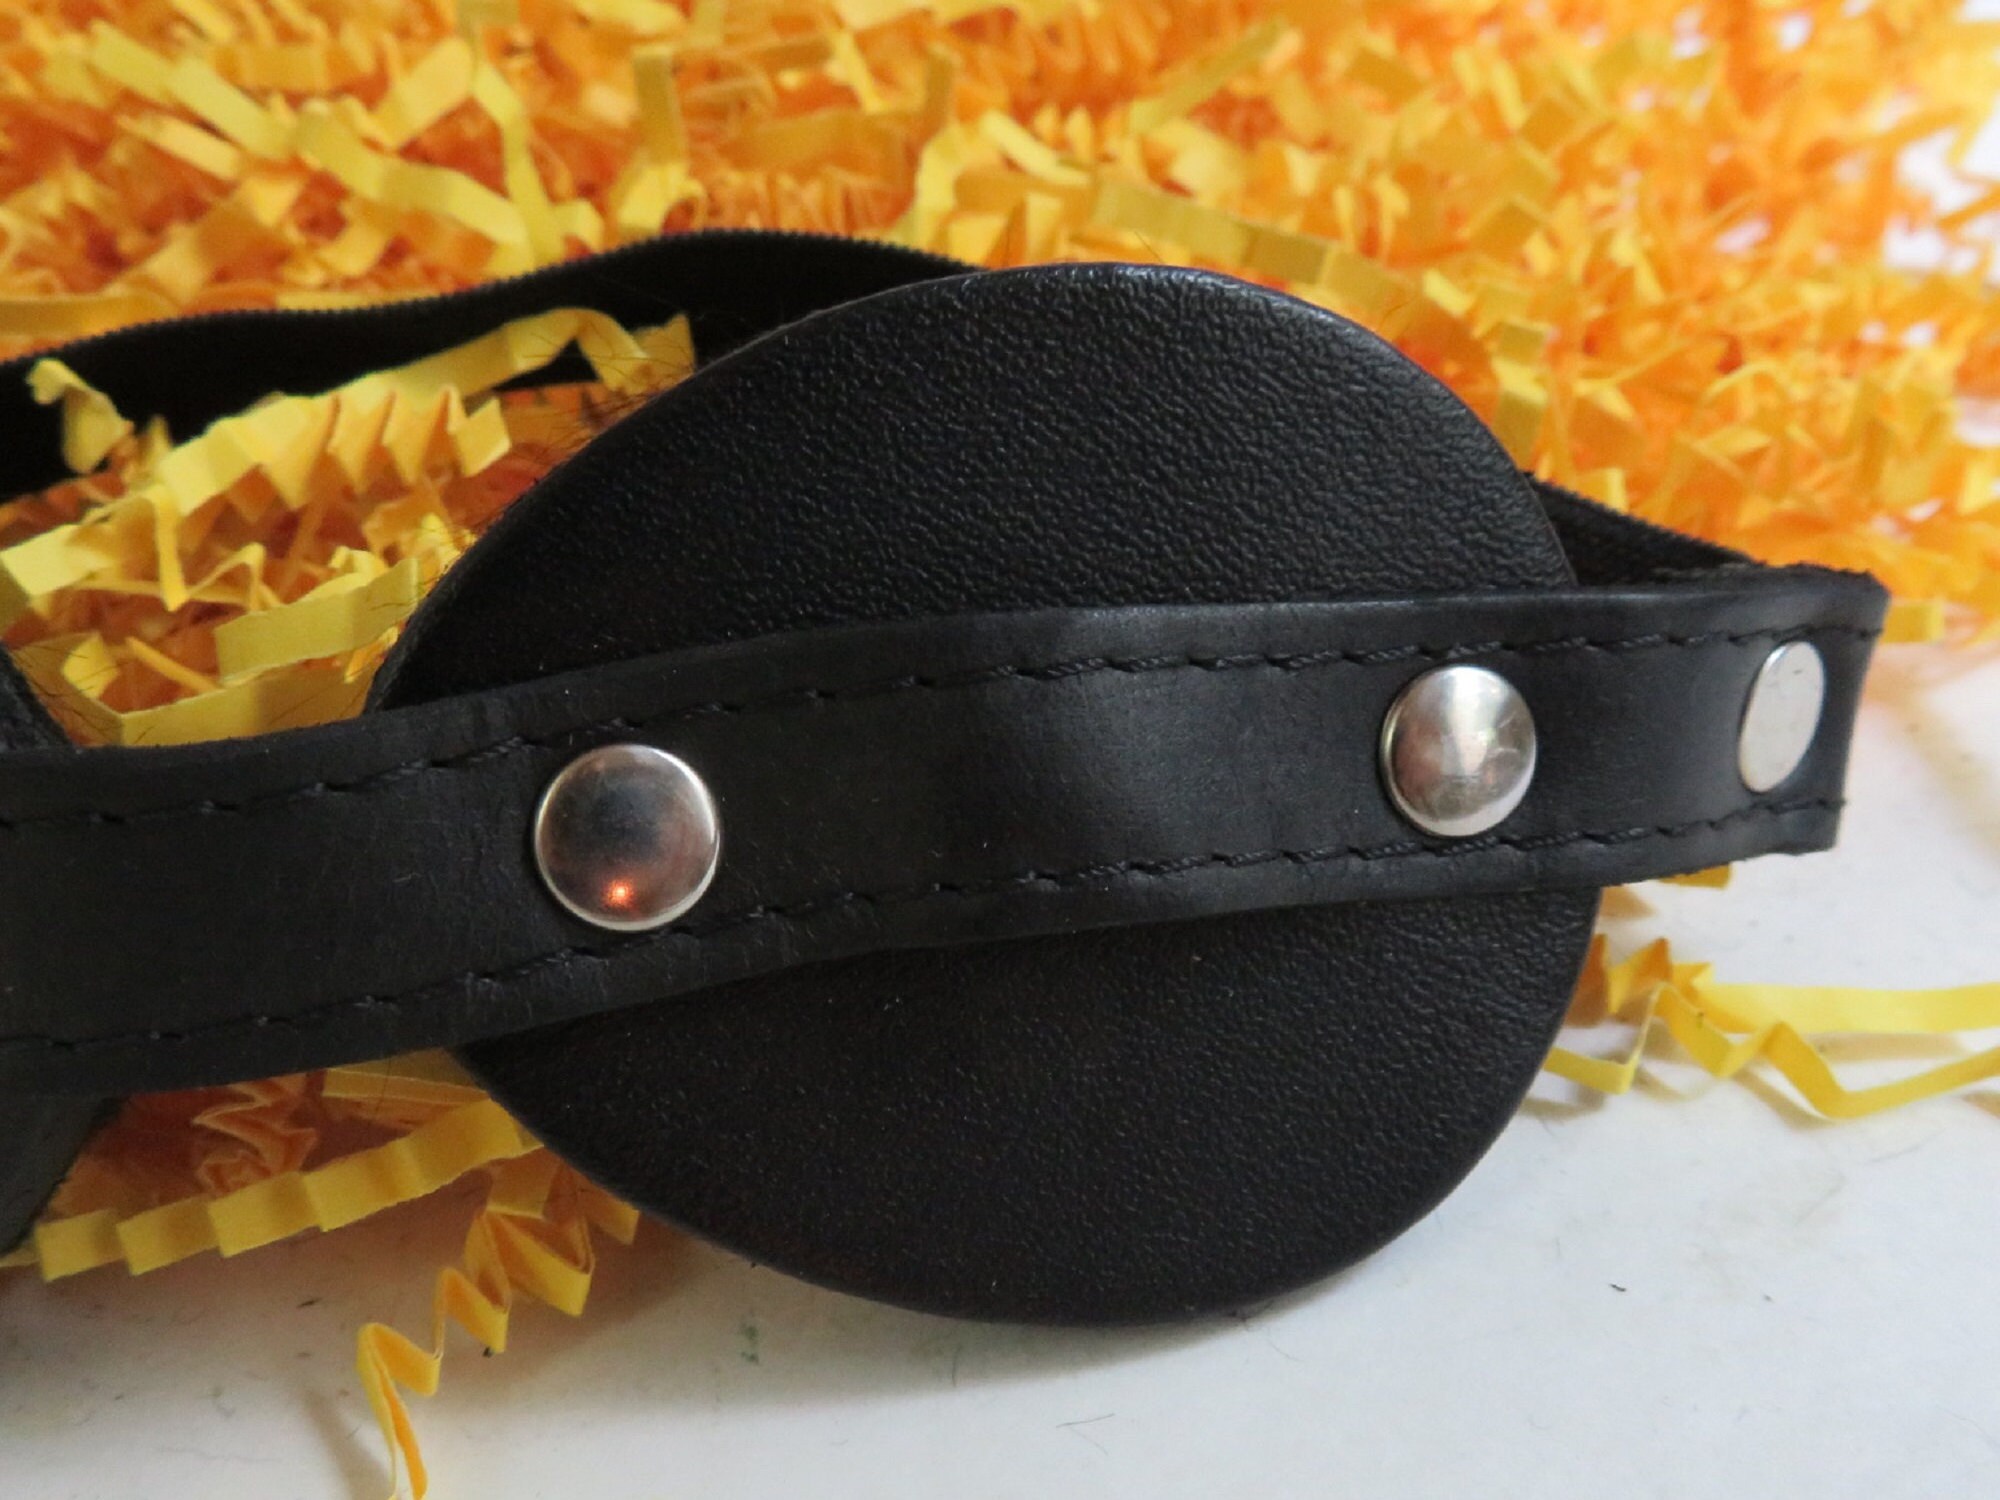 Blindfolds- Plain or Decorated- leather or fur lined,  Hypoallergenic/Contact Friendly (prices vary)